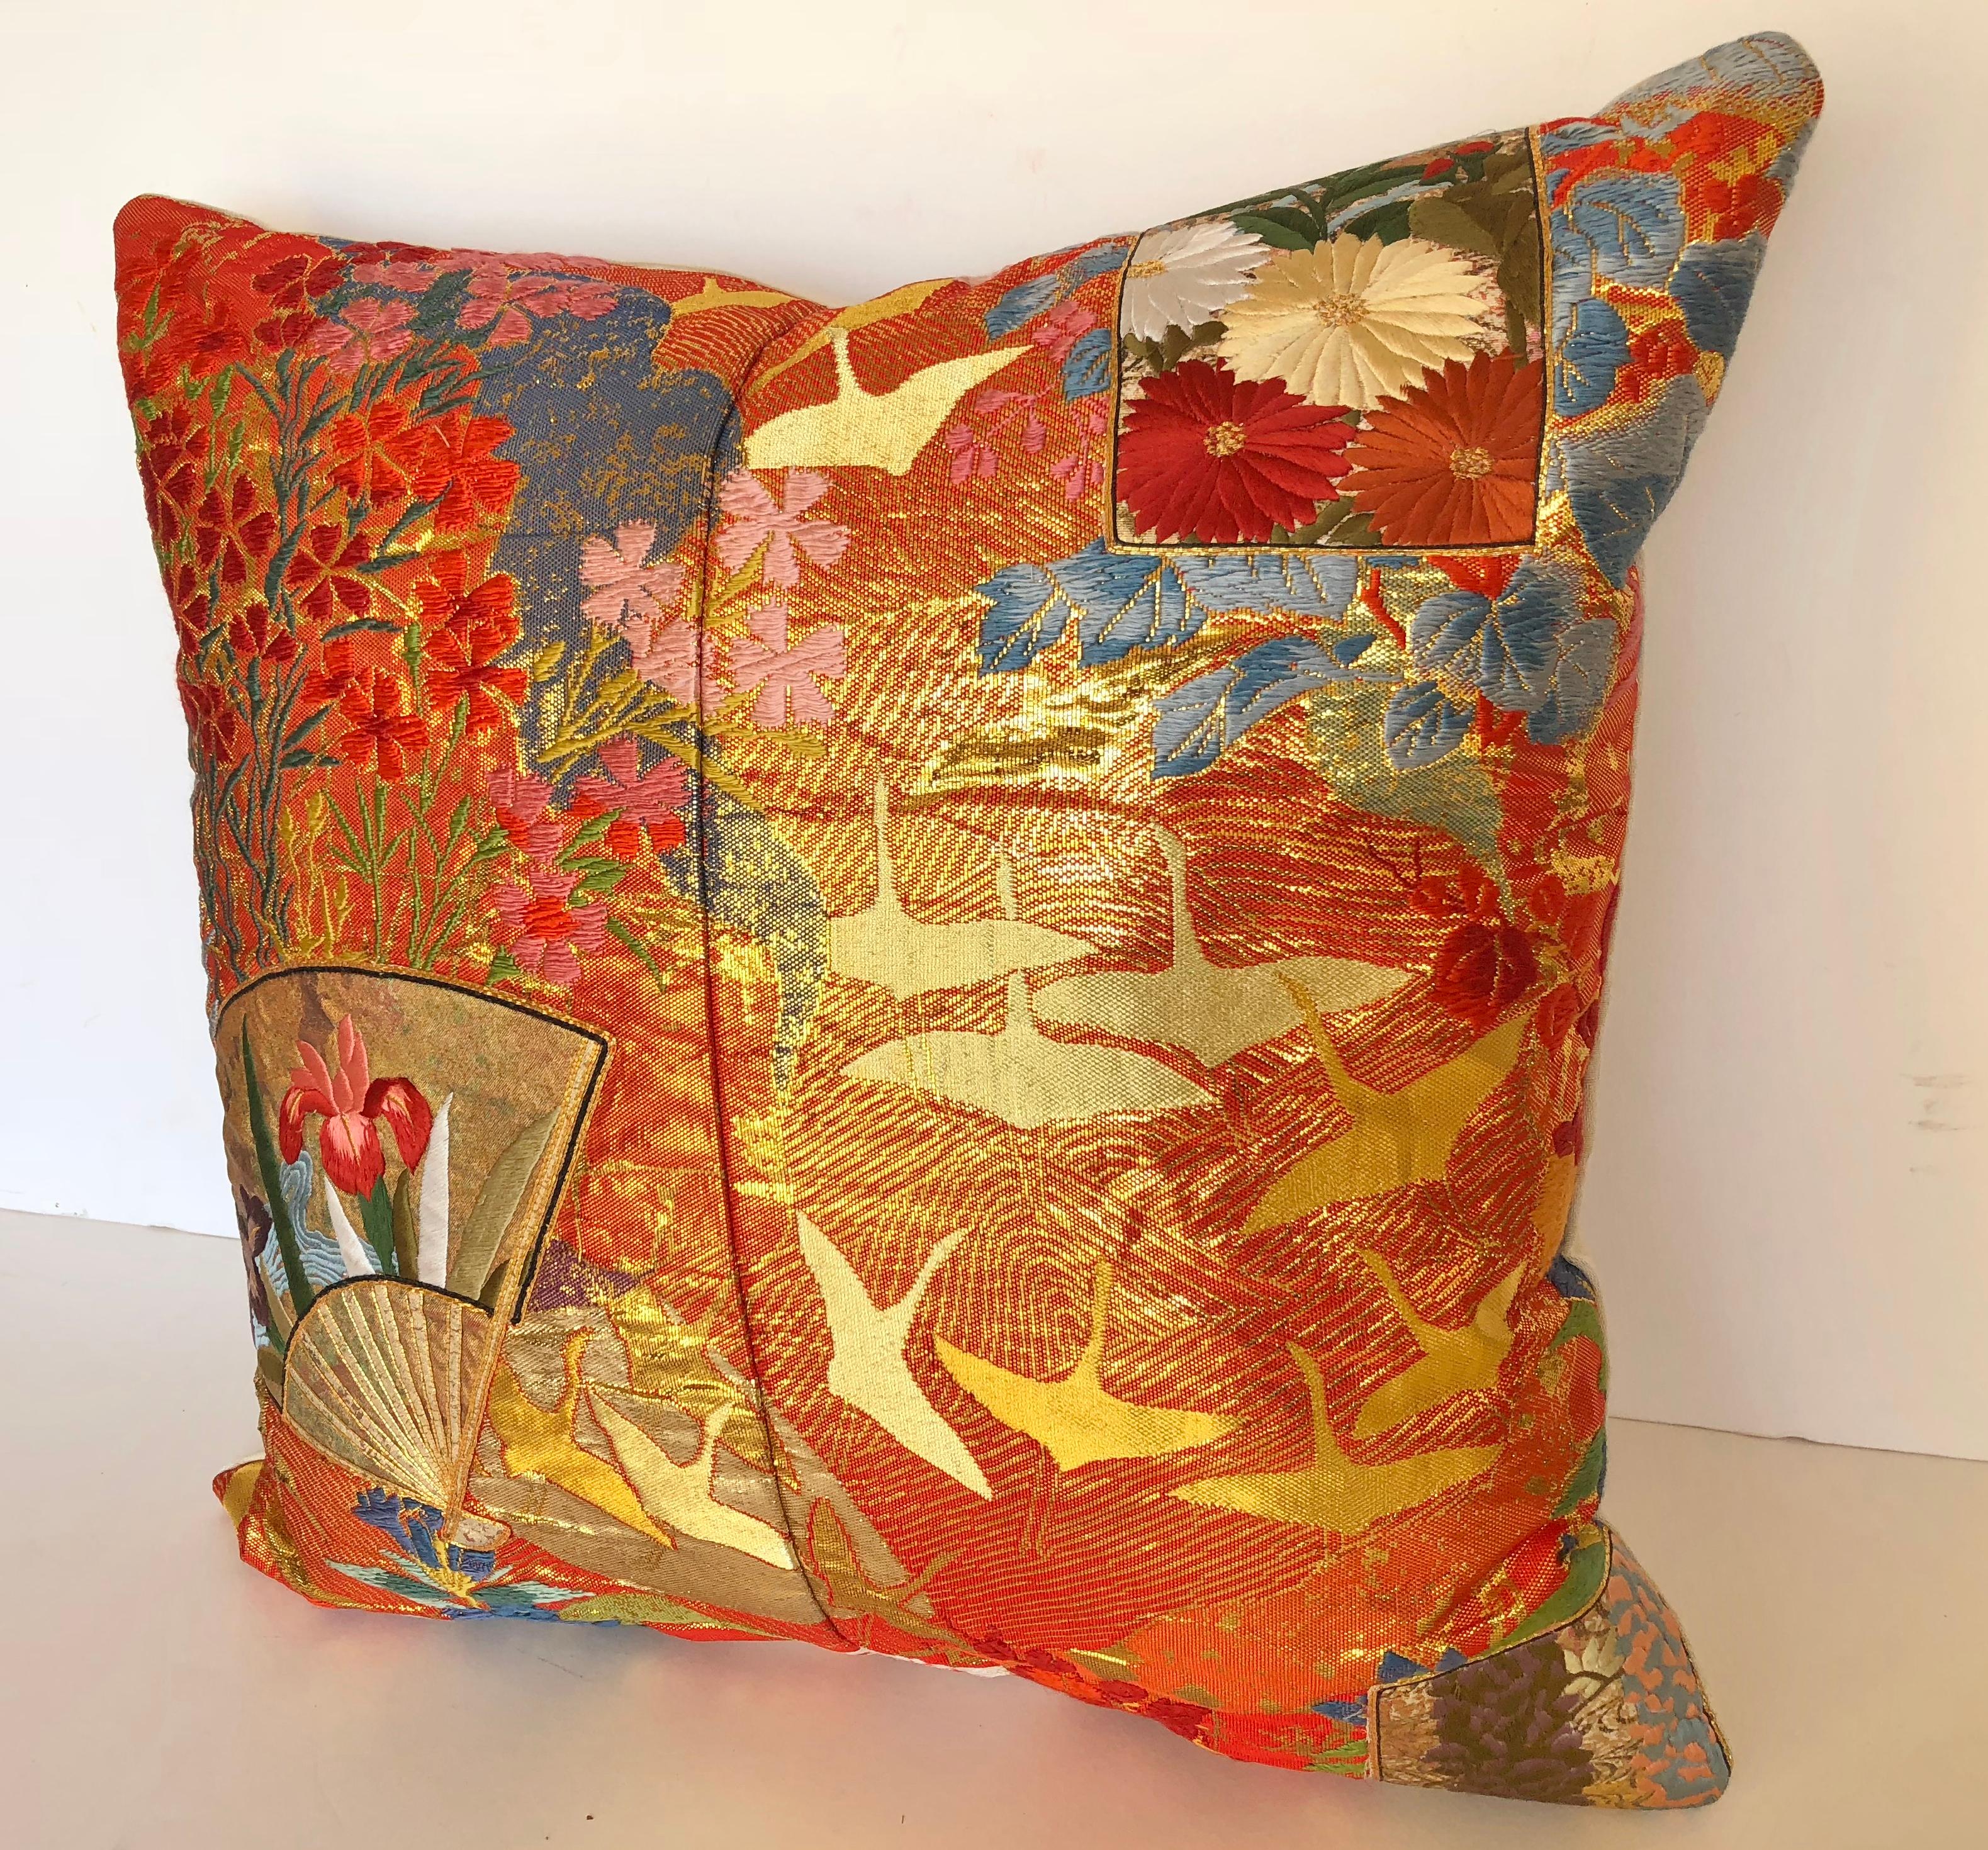 Custom pillow cut from a vintage silk Japanese Uchikake, the traditional wedding kimono. The silk is embellished with florals and birds in metallic threads and silk appliques of fans and flowers. The pillow is backed with a silk/linen Scalamandre